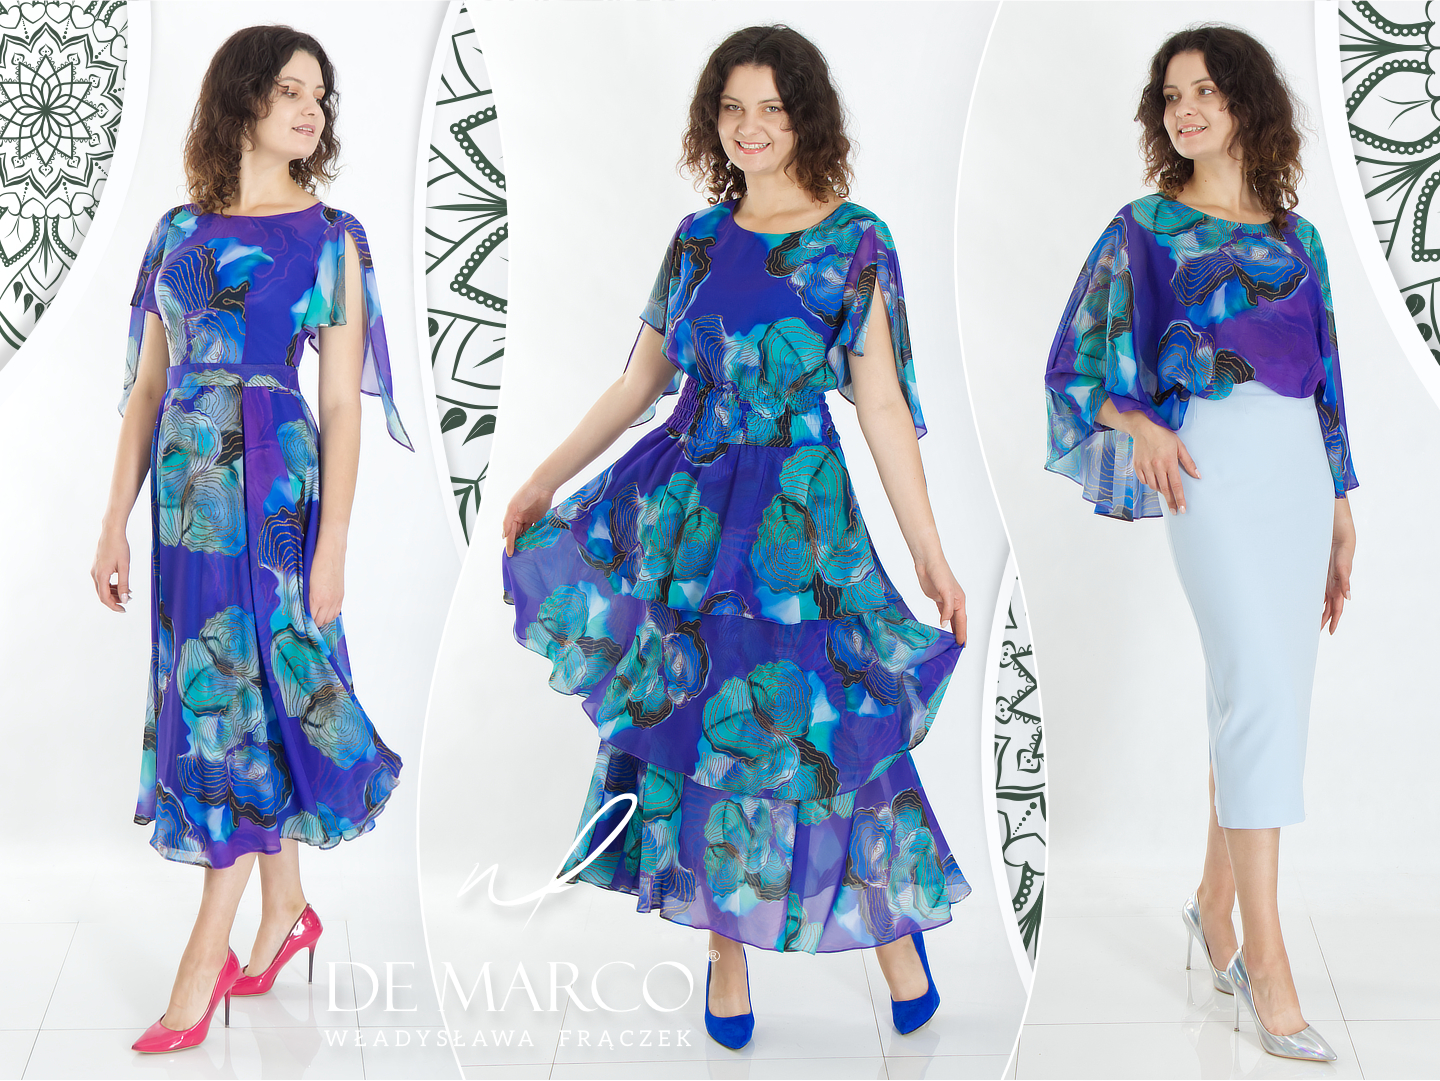 Elegant Polish dresses by De Marco. Autumn styles for work and weddings